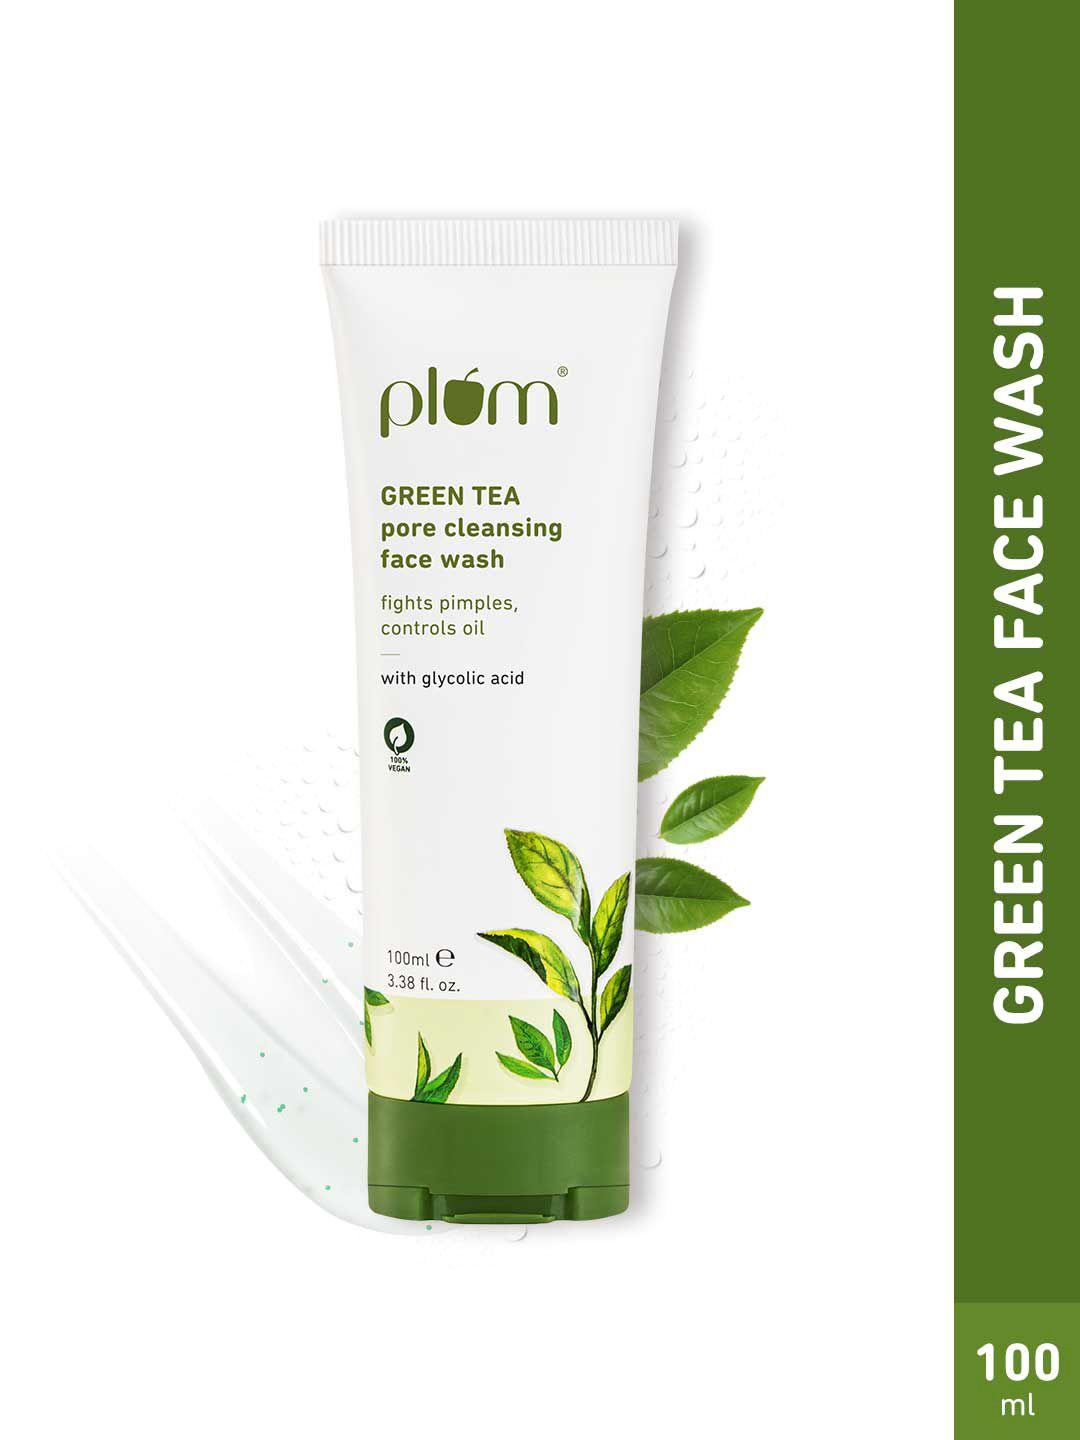 plum green tea pore cleansing face wash with glycolic acid for acne & oil control - 100ml